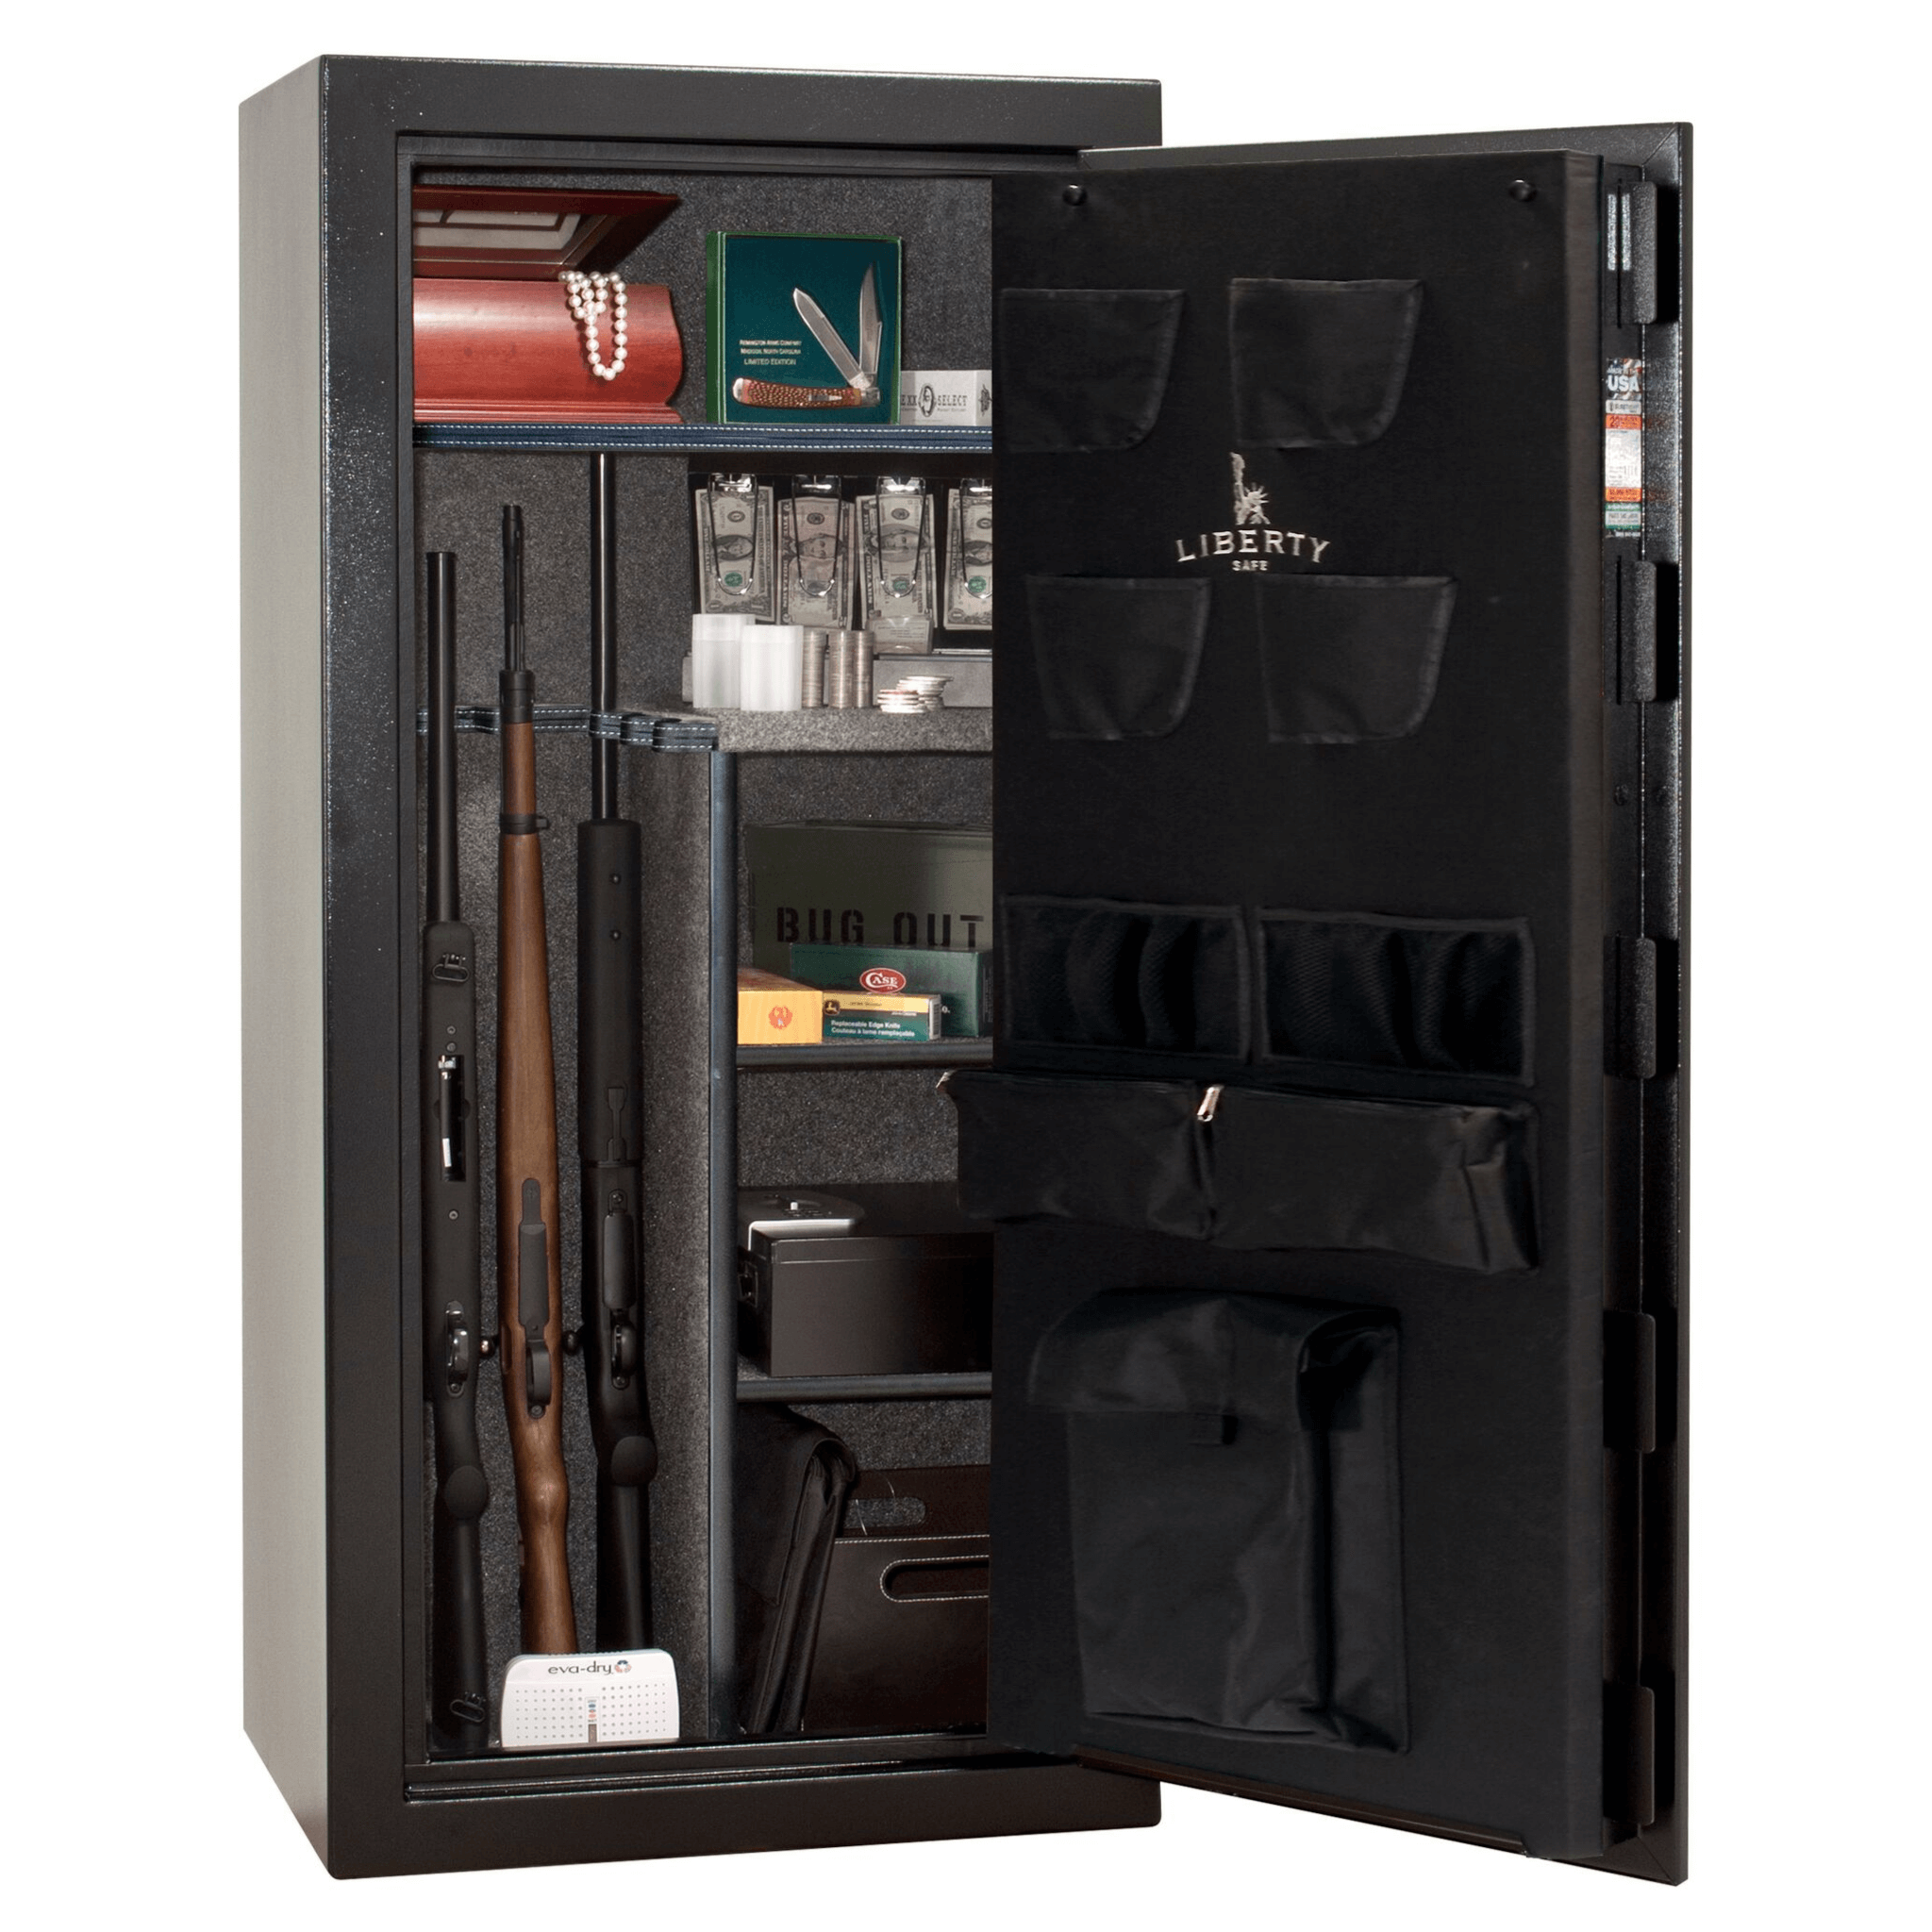 Liberty Centurion DLX 24 Texture Granite with Electronic Lock Gun Safe - OUT THE DOOR, image 2 